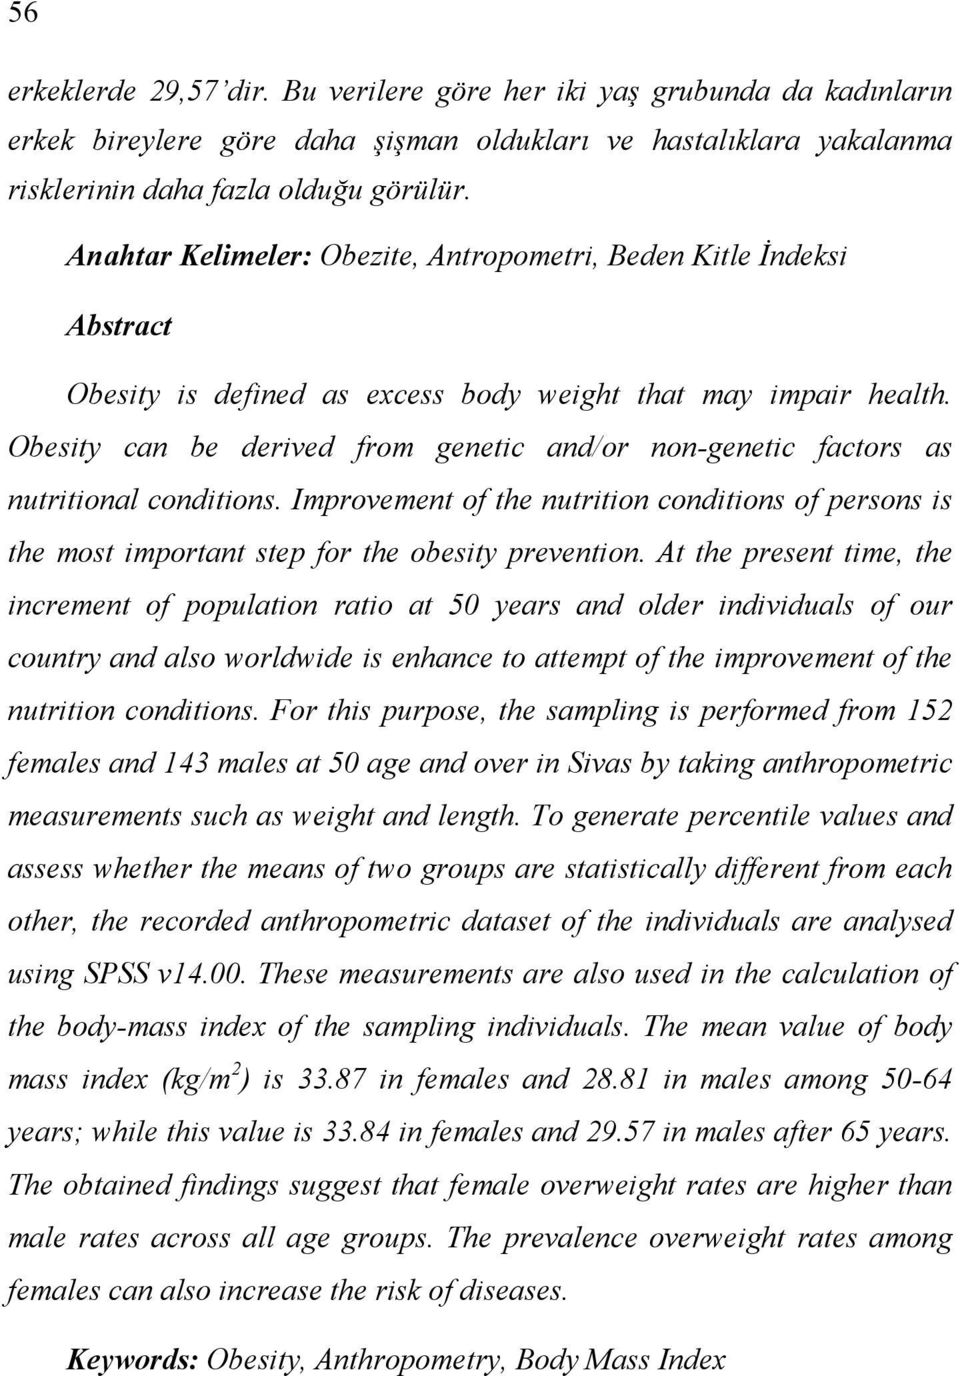 Obesity can be derived from genetic and/or non-genetic factors as nutritional conditions. Improvement of the nutrition conditions of persons is the most important step for the obesity prevention.